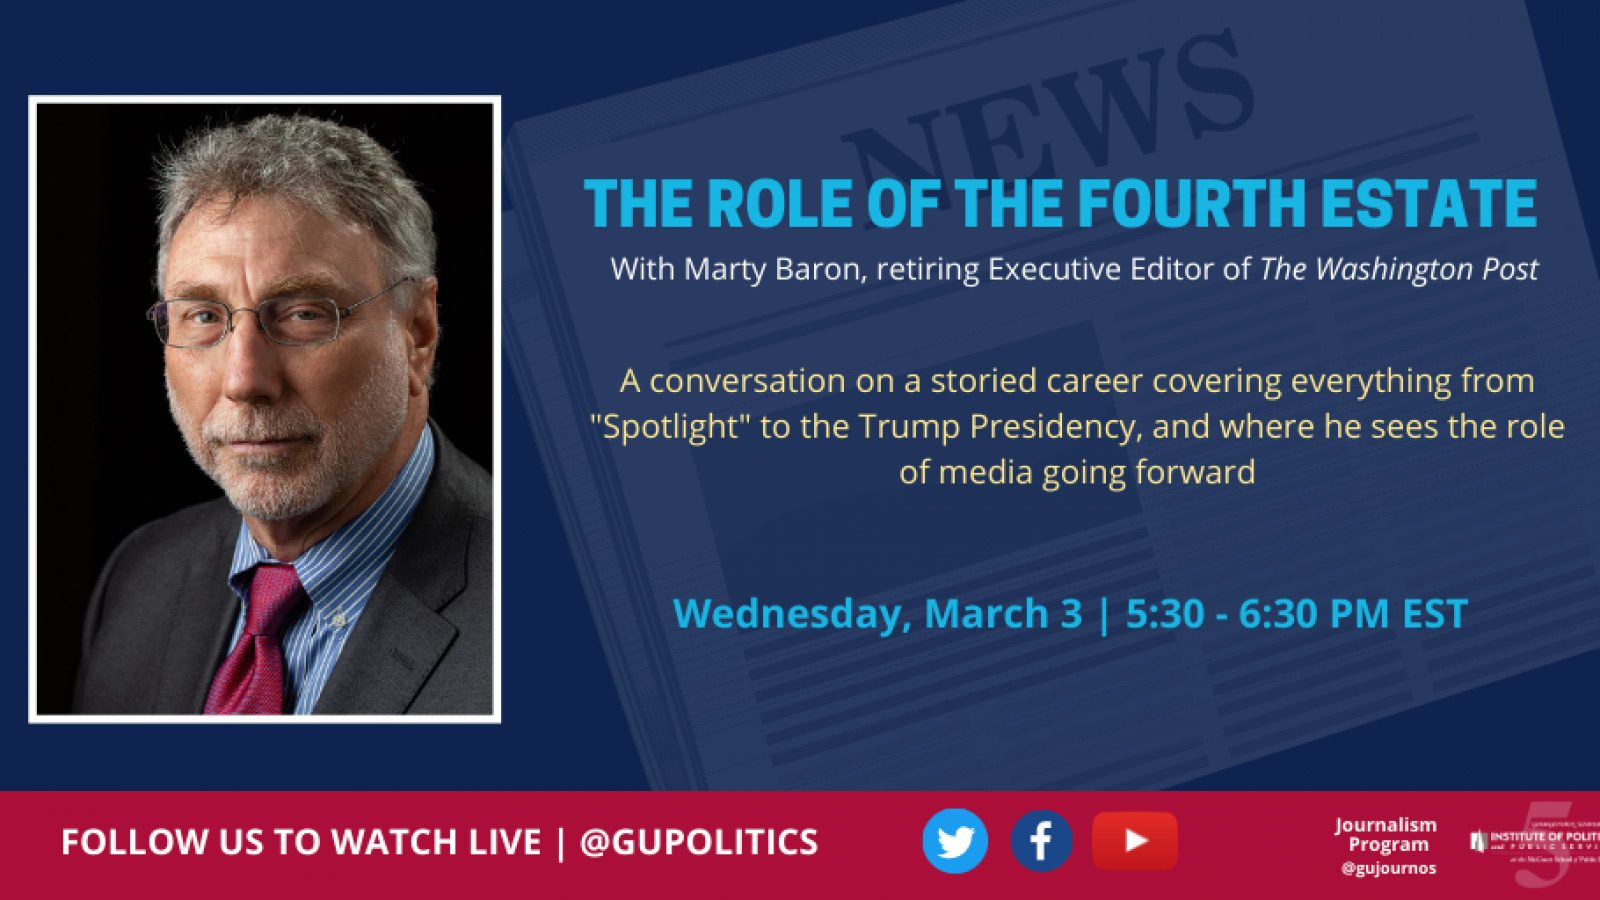 Just three days after stepping down as the Executive Editor of The Washington Post, Marty Baron joined the Georgetown Institute of Politics and Public Service at the McCourt School of Public Policy for a valedictory appearance covering his time in journalism and the role of the Fourth Estate.